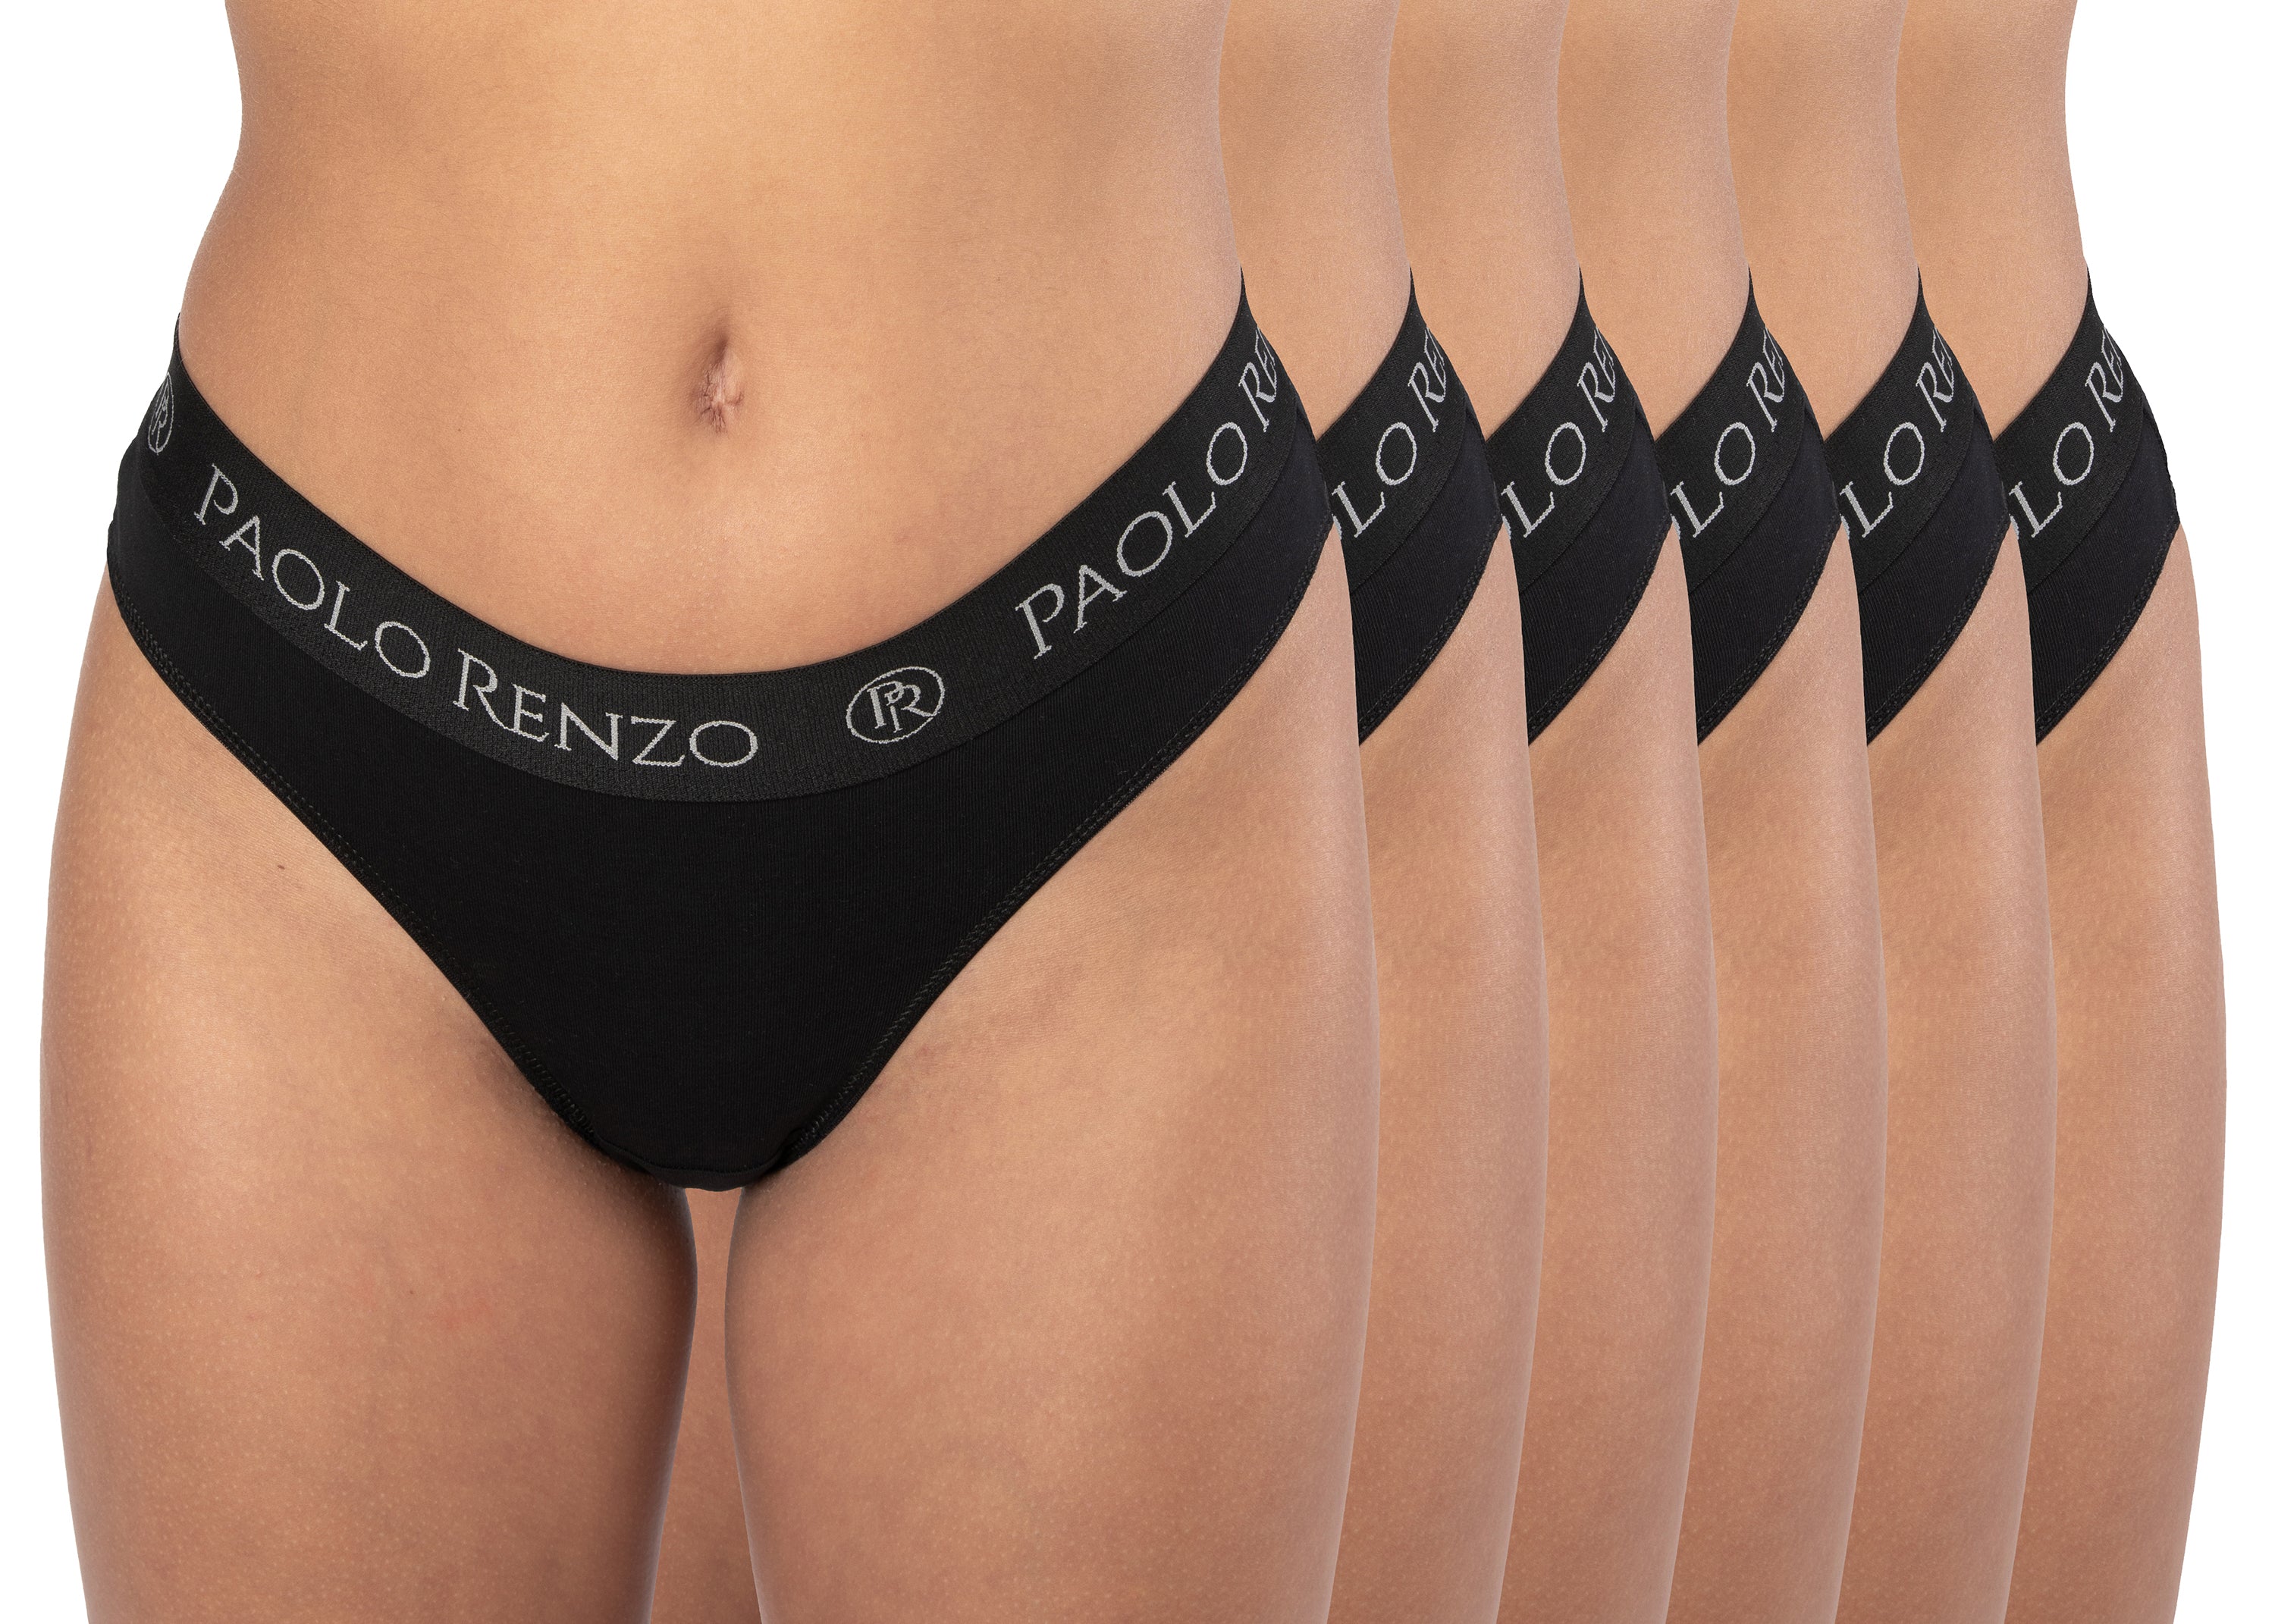 Paolo Renzo® women's cotton thong SPORT LINE 3 or 6 pairs - sizes S, M, L,  XL - Black / S / 6